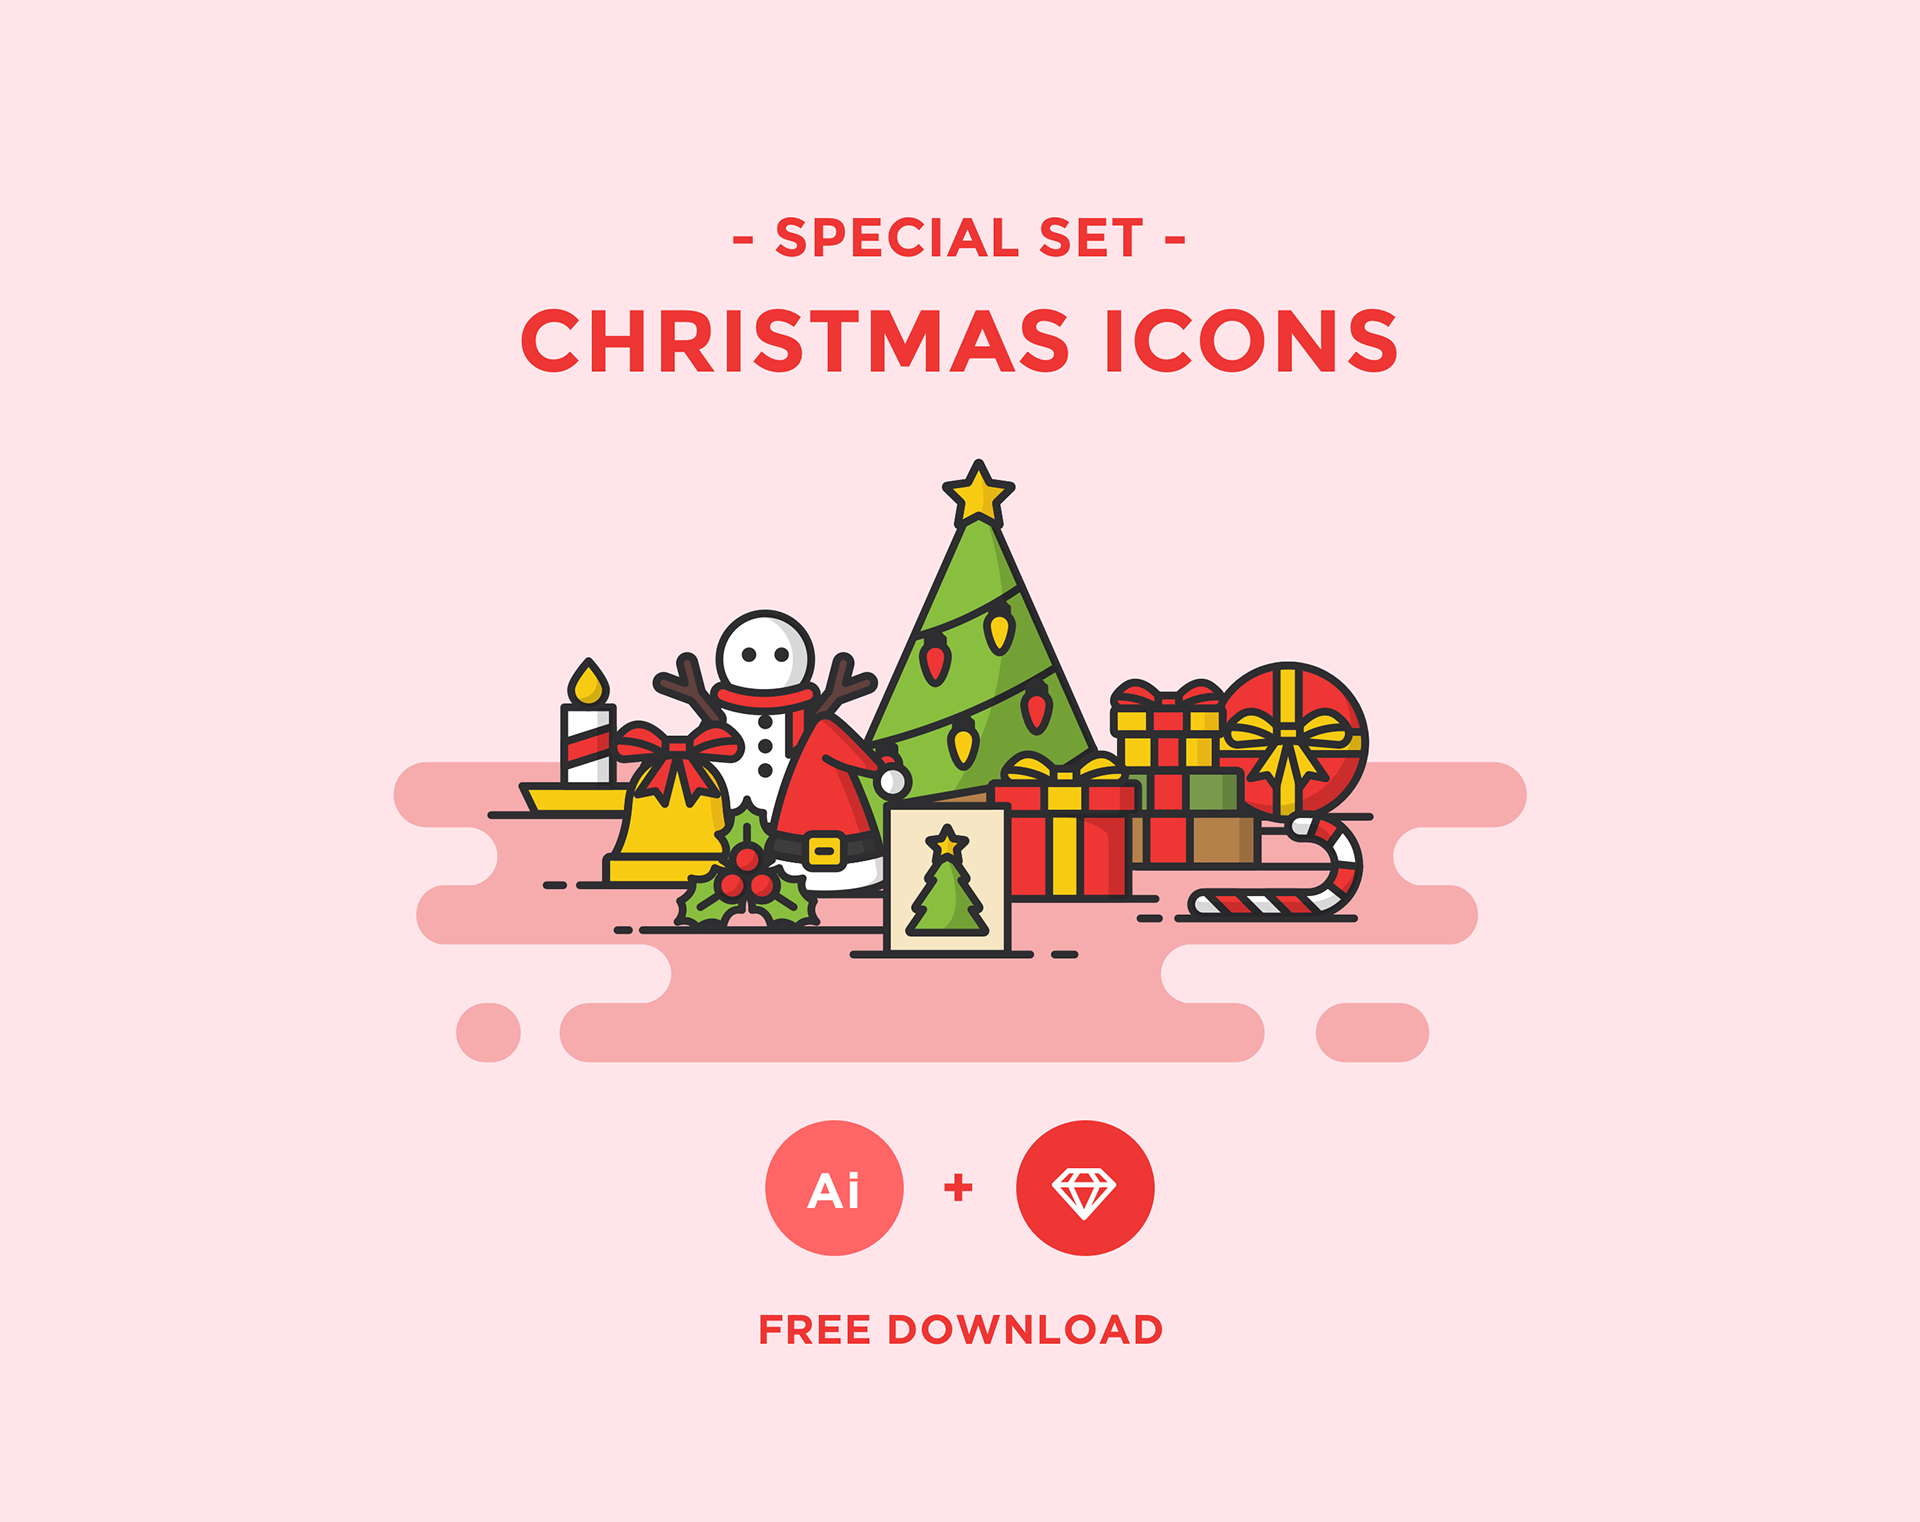 Free christmas icons to download